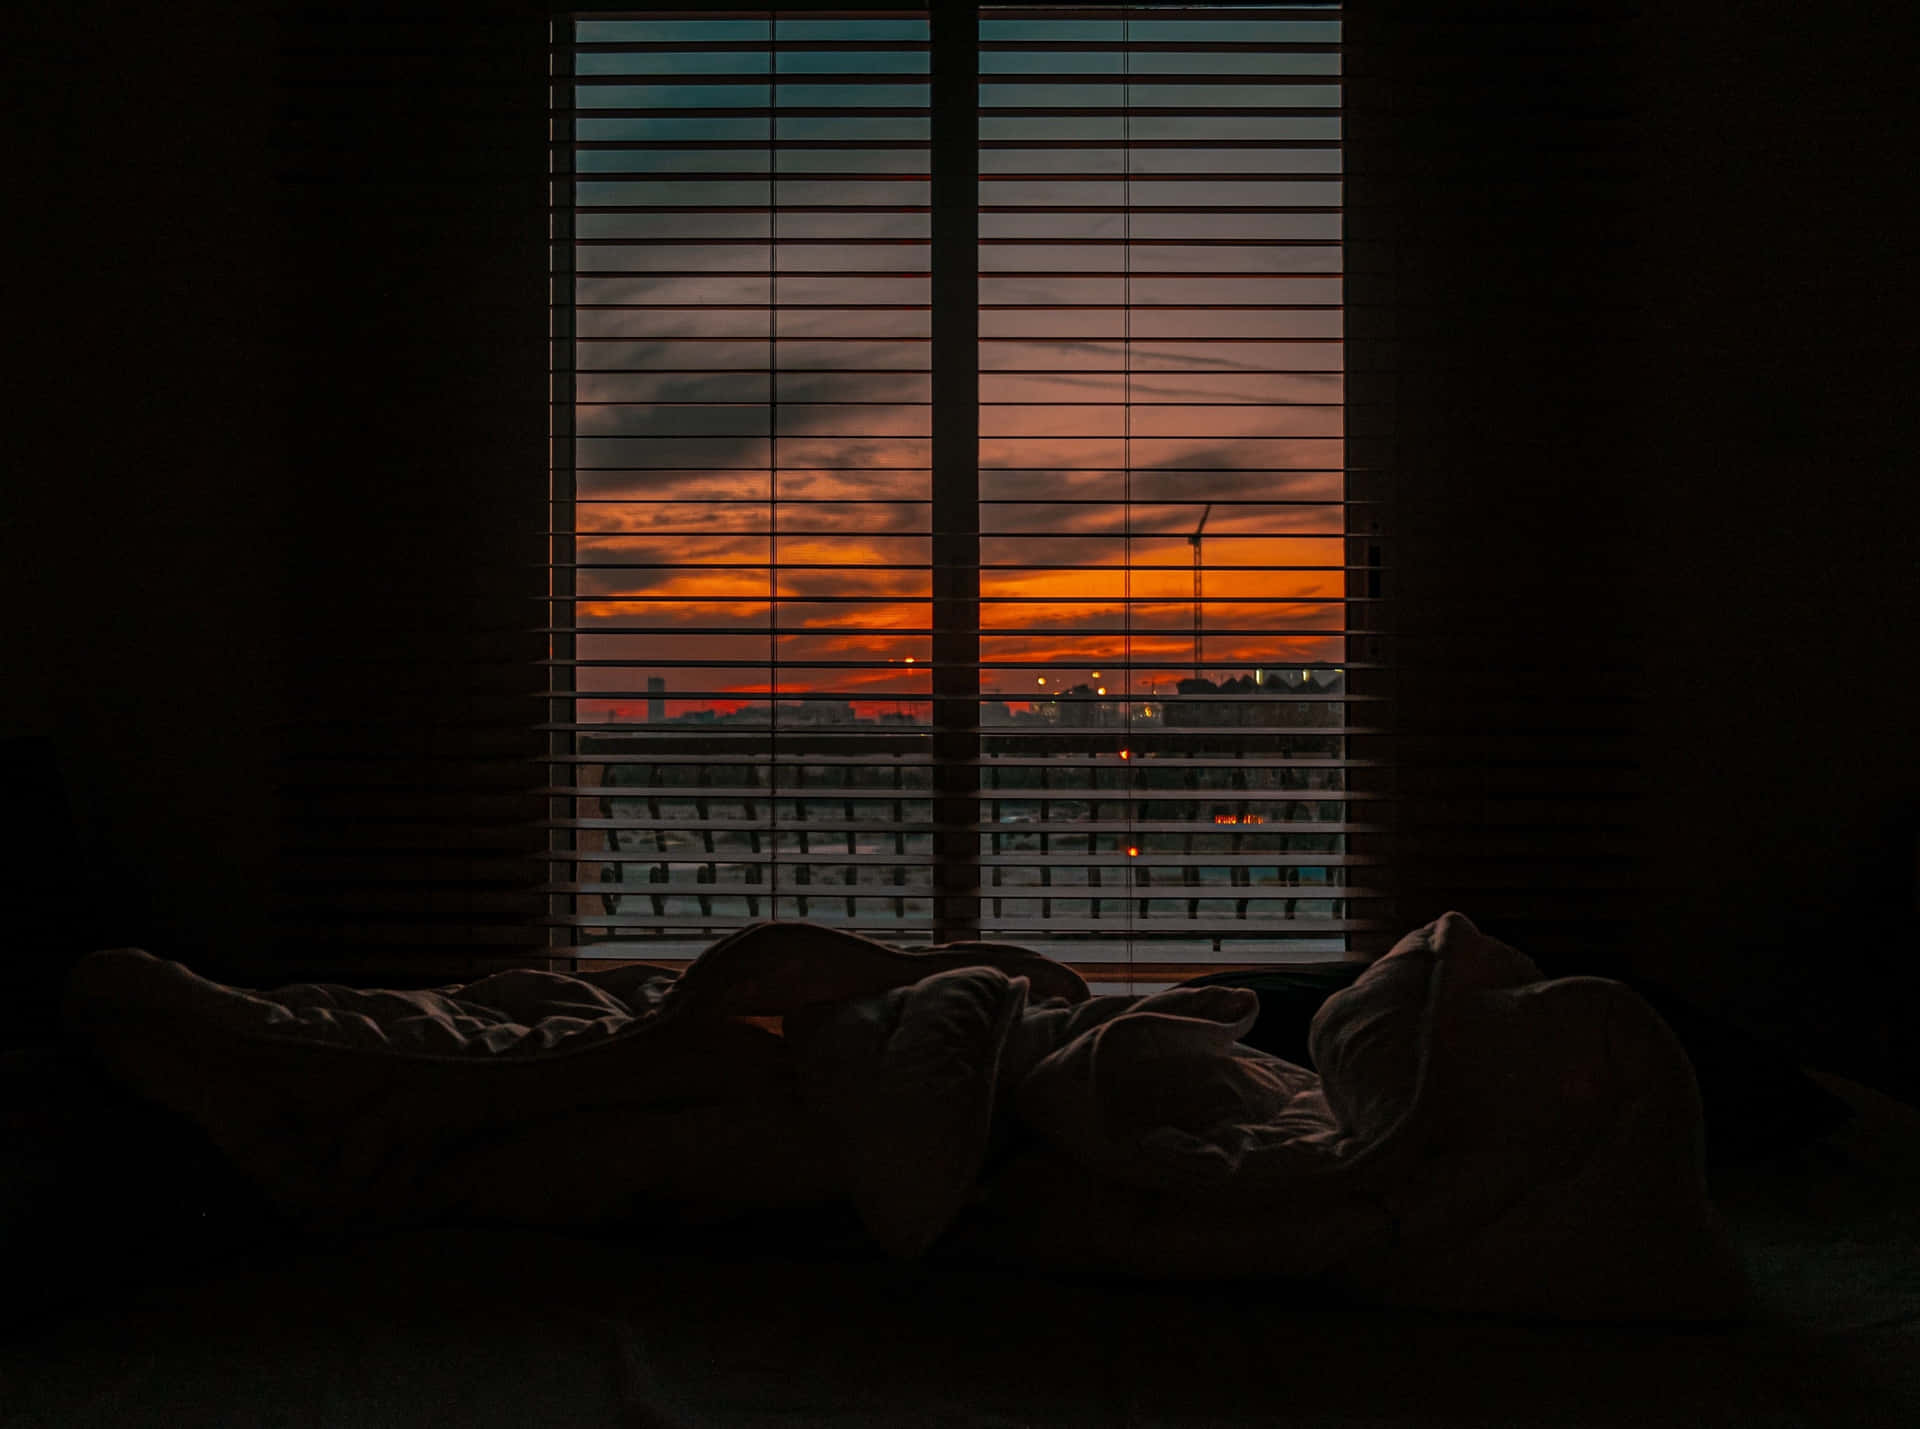 Window Blind And Sunset